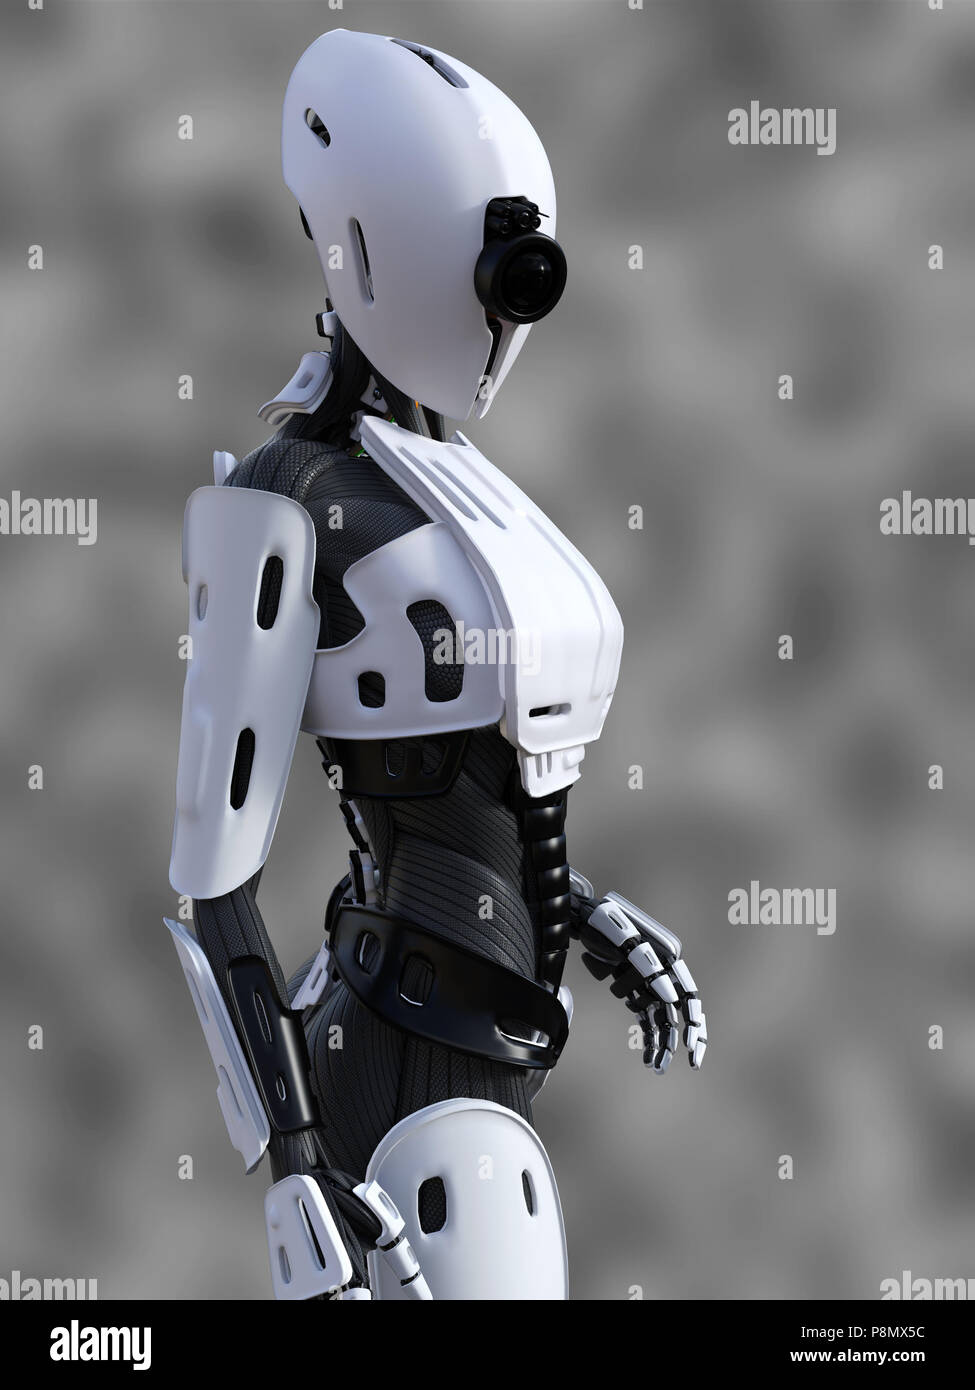 16 Fashion Dior Robot Images, Stock Photos, 3D objects, & Vectors